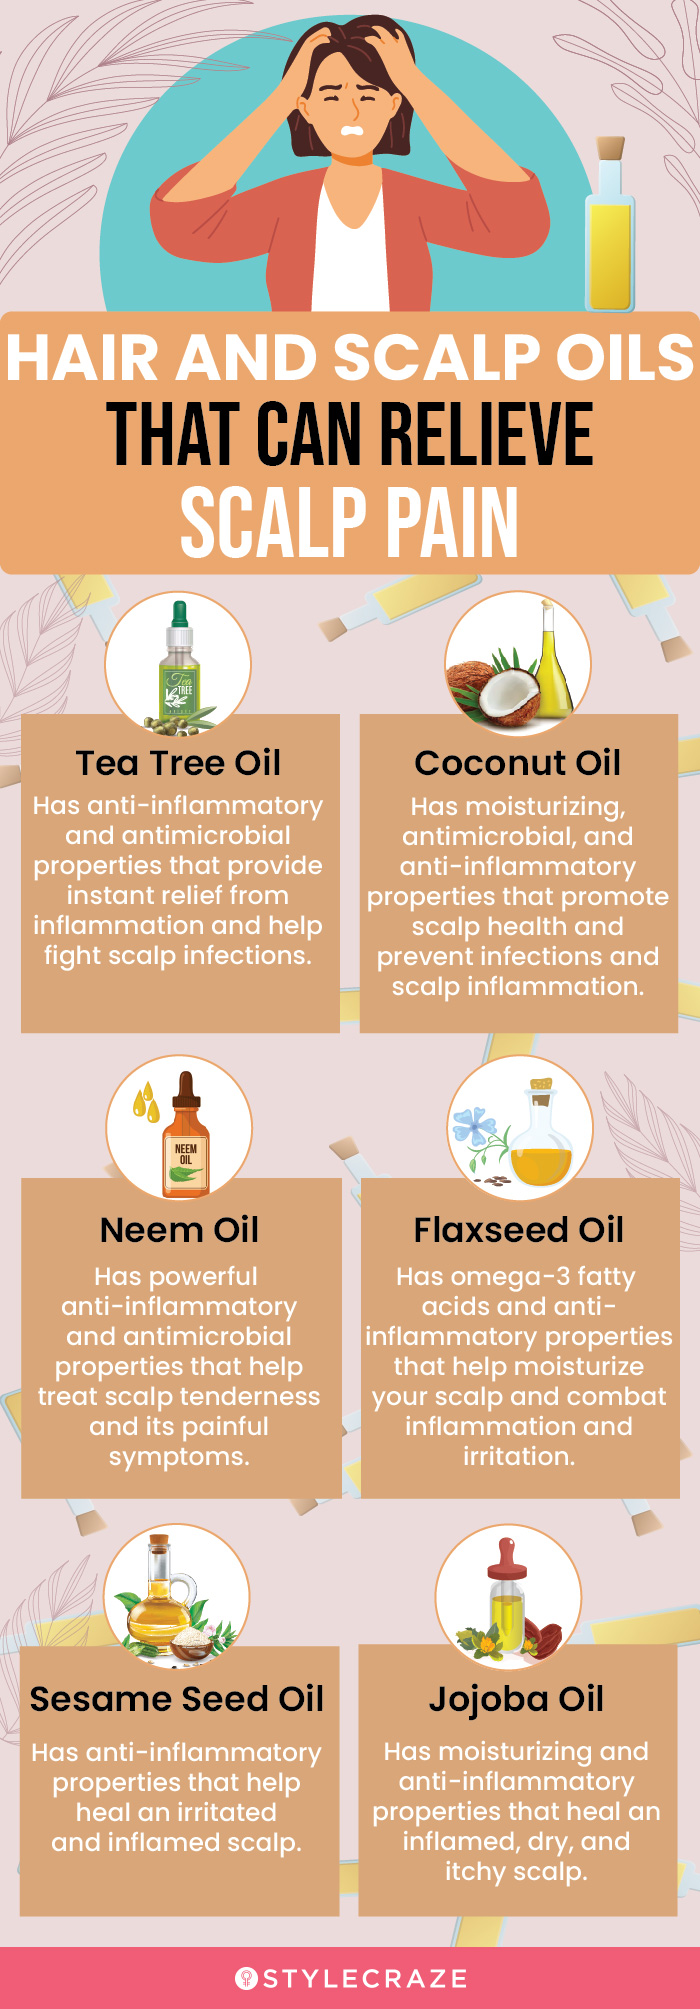 hair and scalp oils that can relieve scalp pain (infographic)